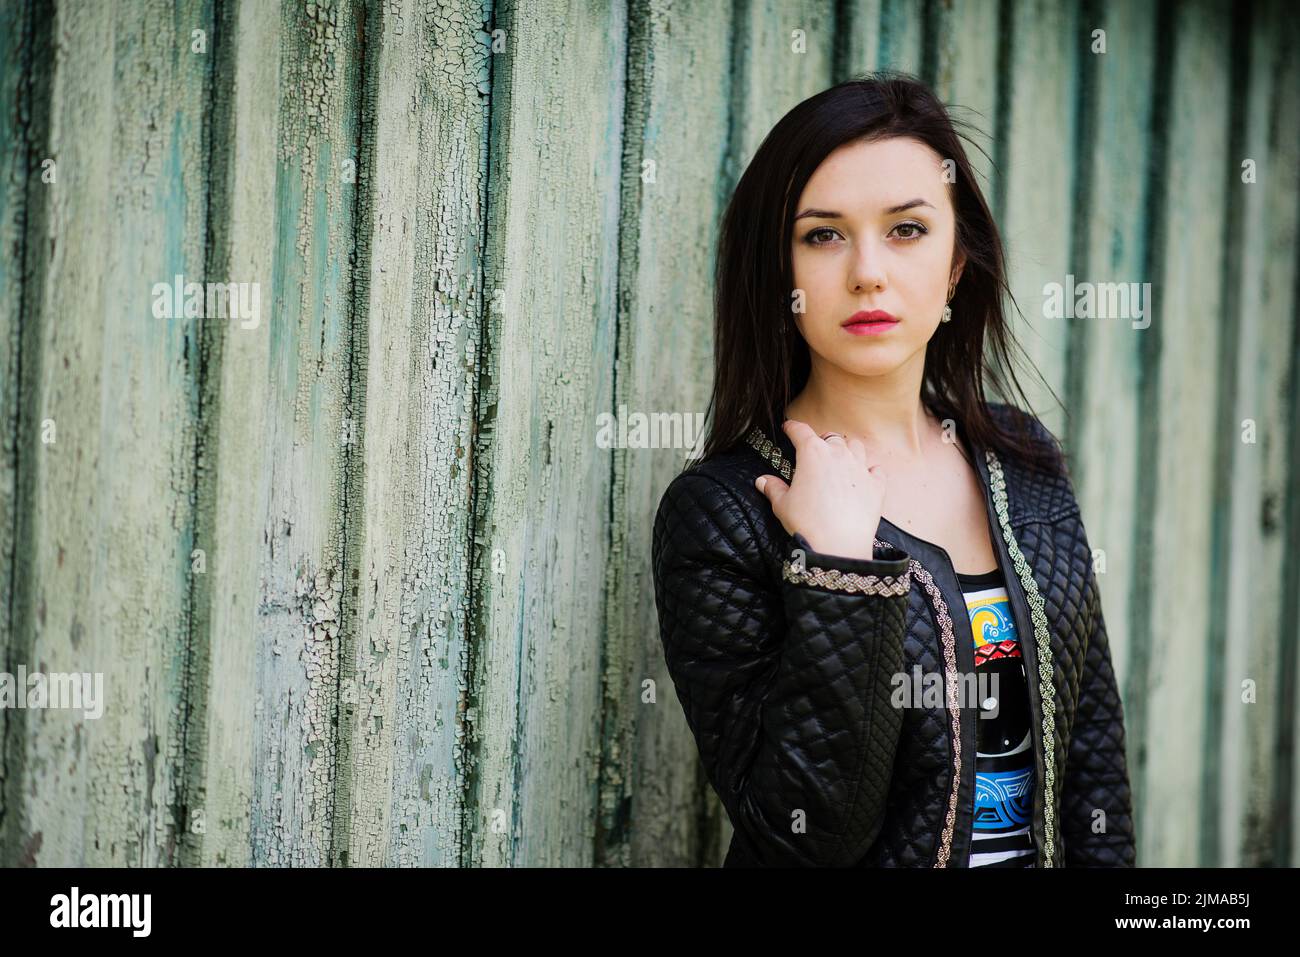 Brunette model girl at leather jacket posed background old wooden house. Stock Photo